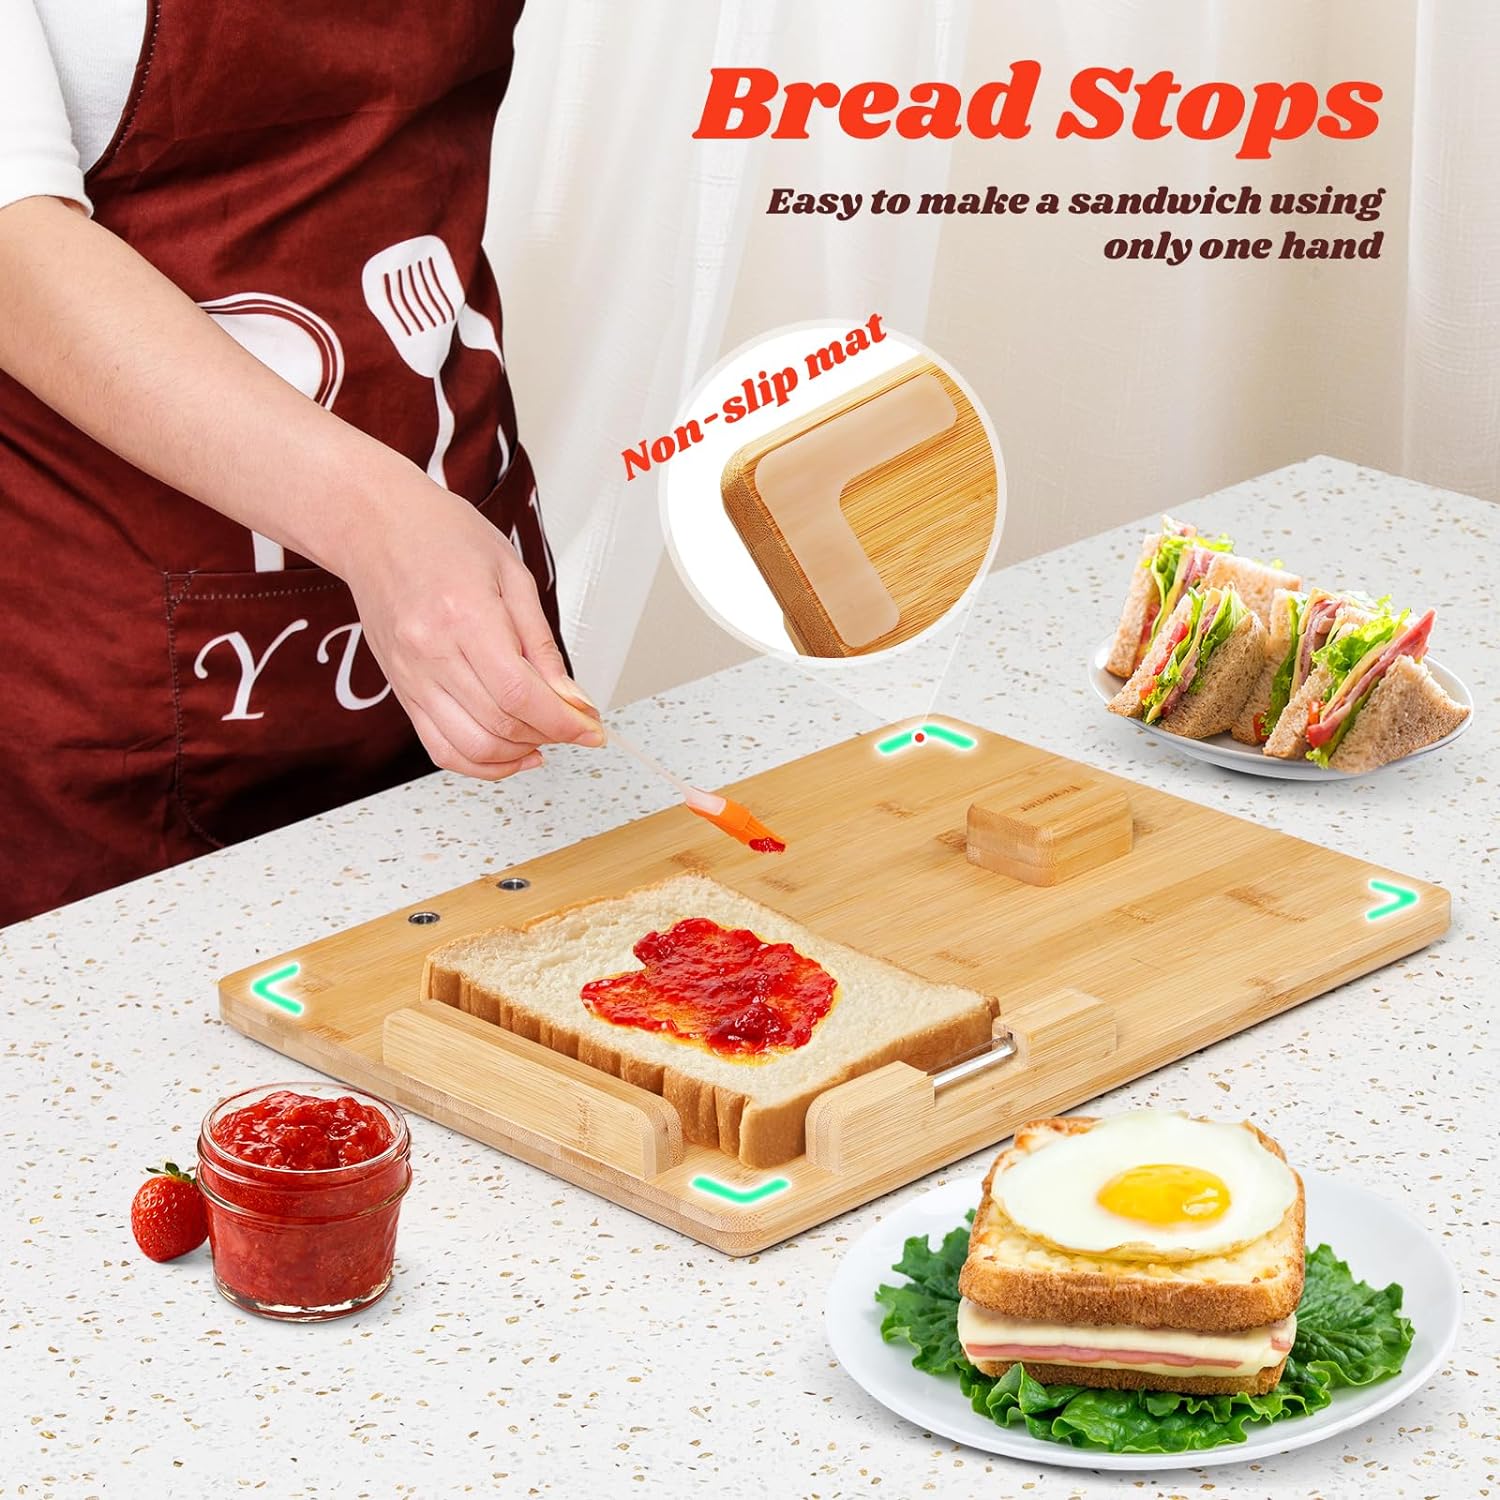 Bread Stops to easily make a sandwich using only one hand